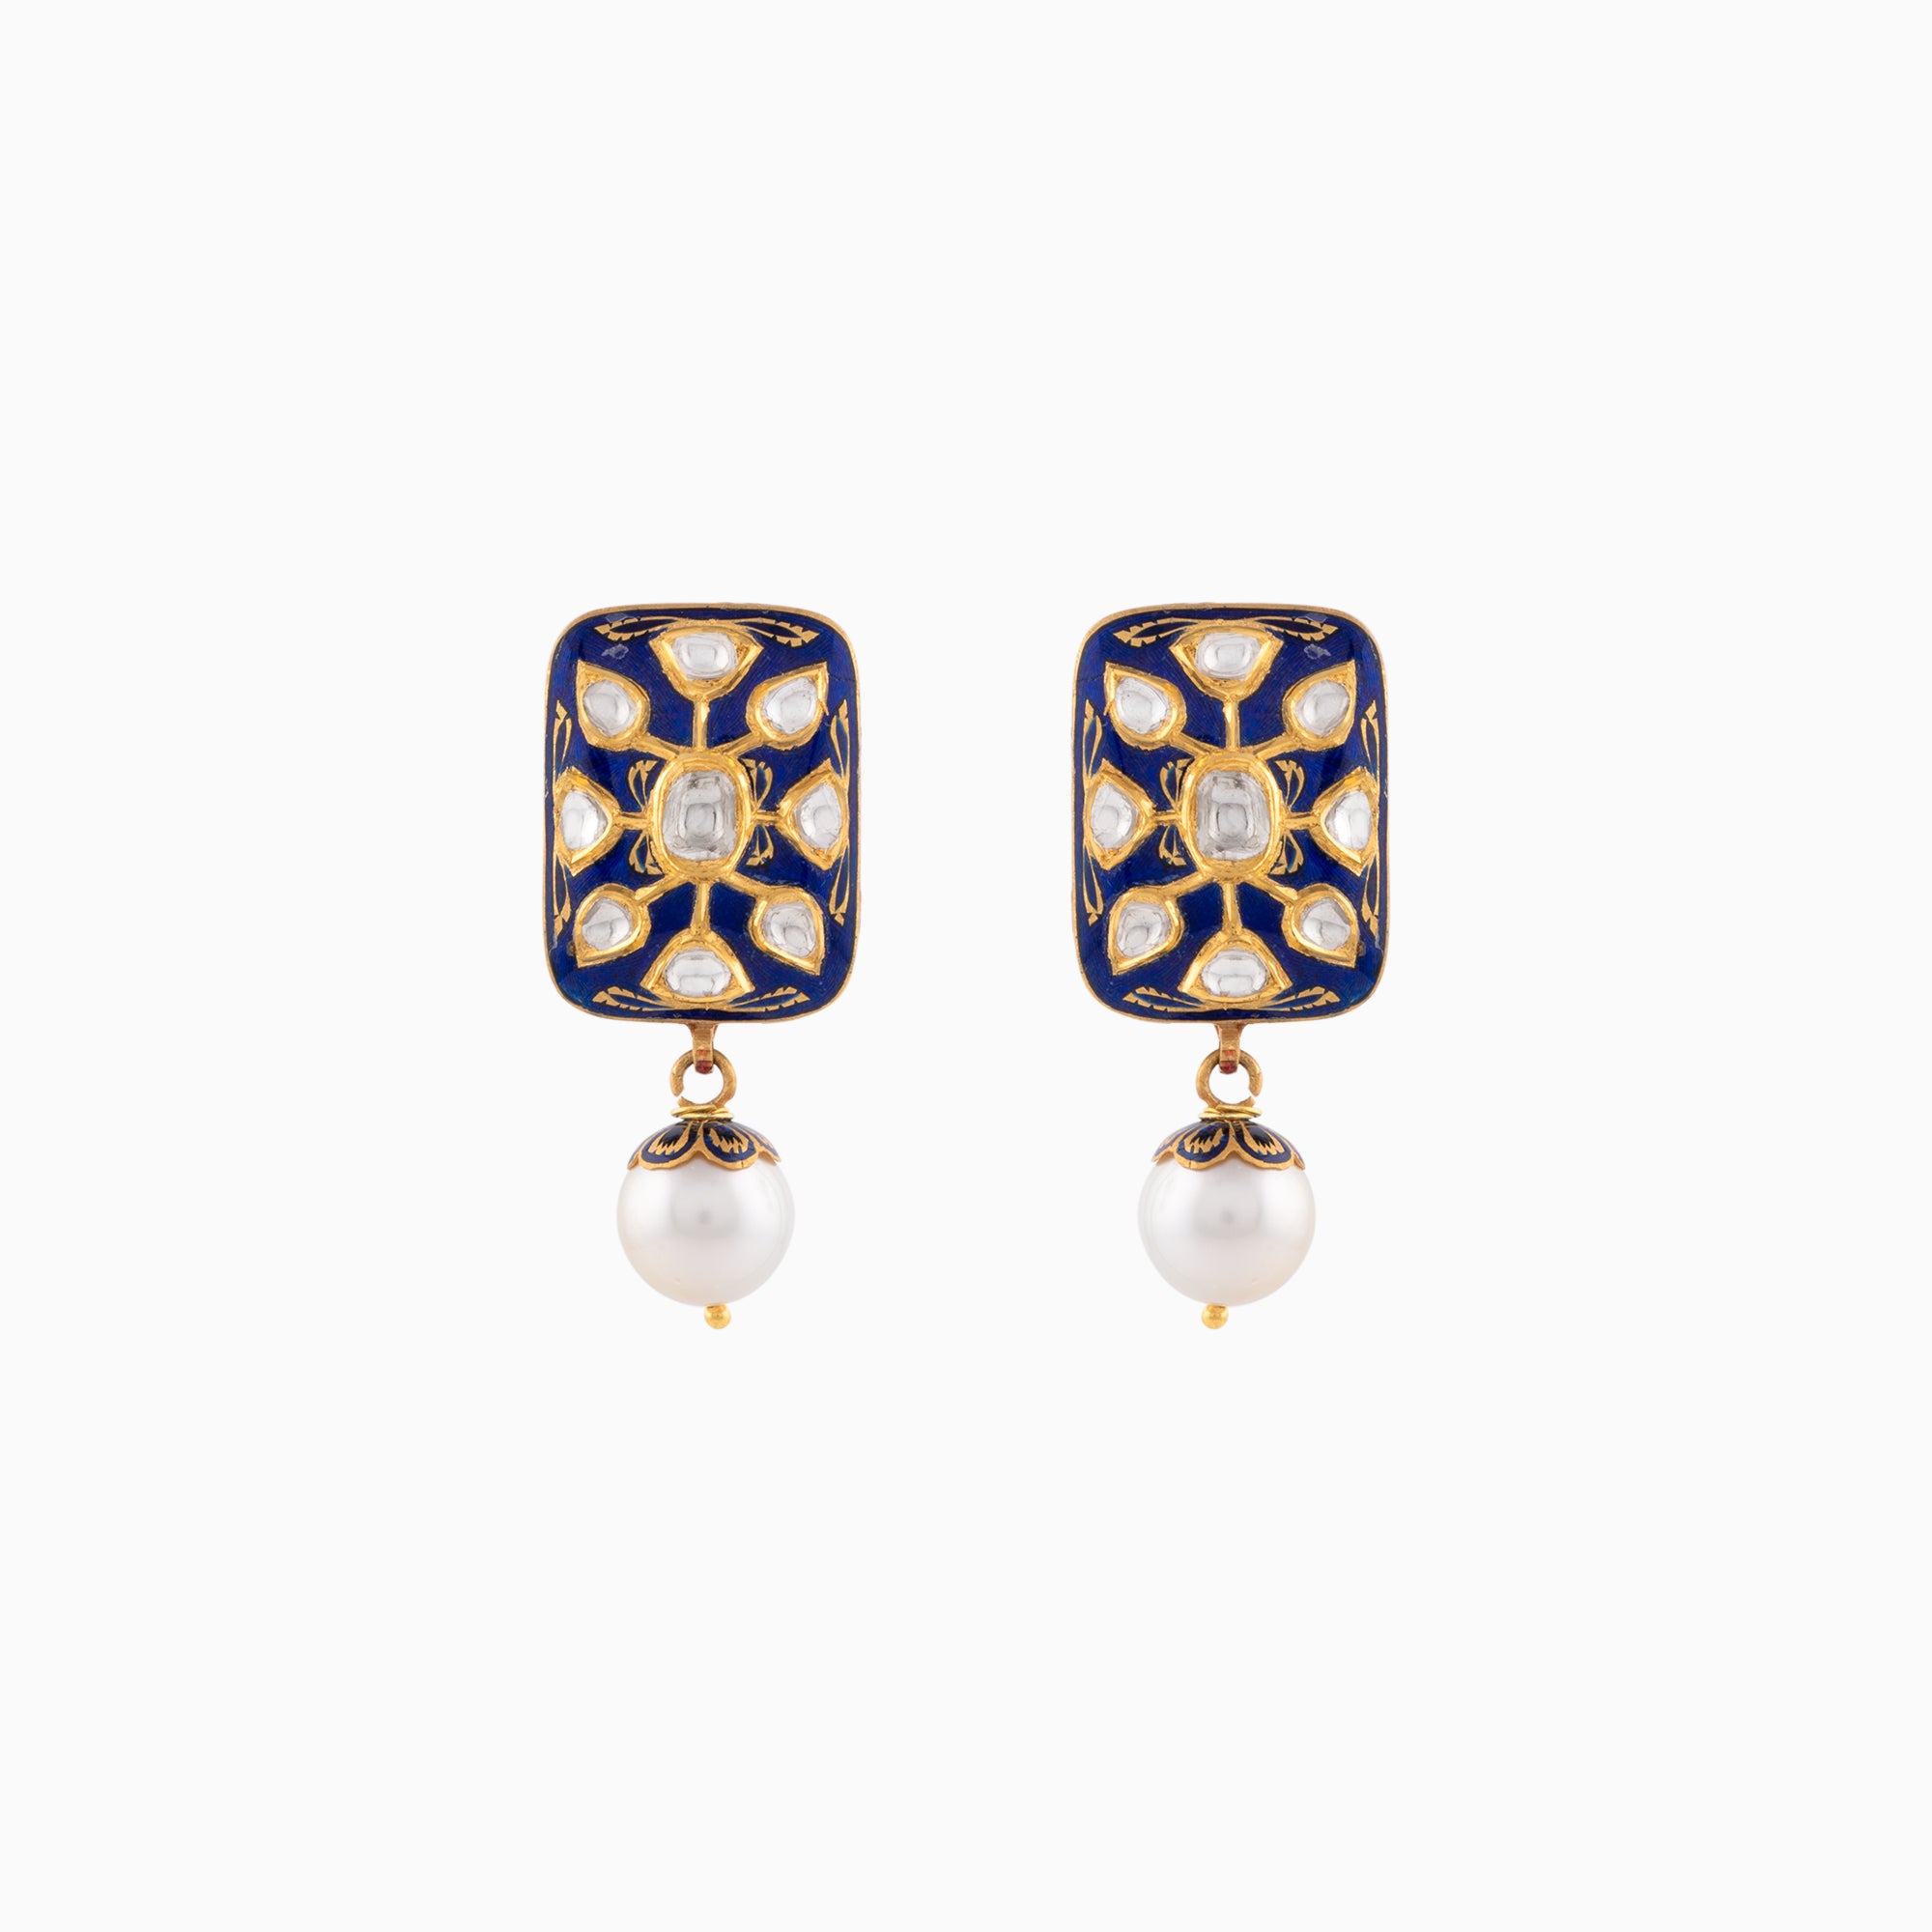 Earring Pair with Uncut Polki Diamond, and S.S. Pearls-KMNE2215